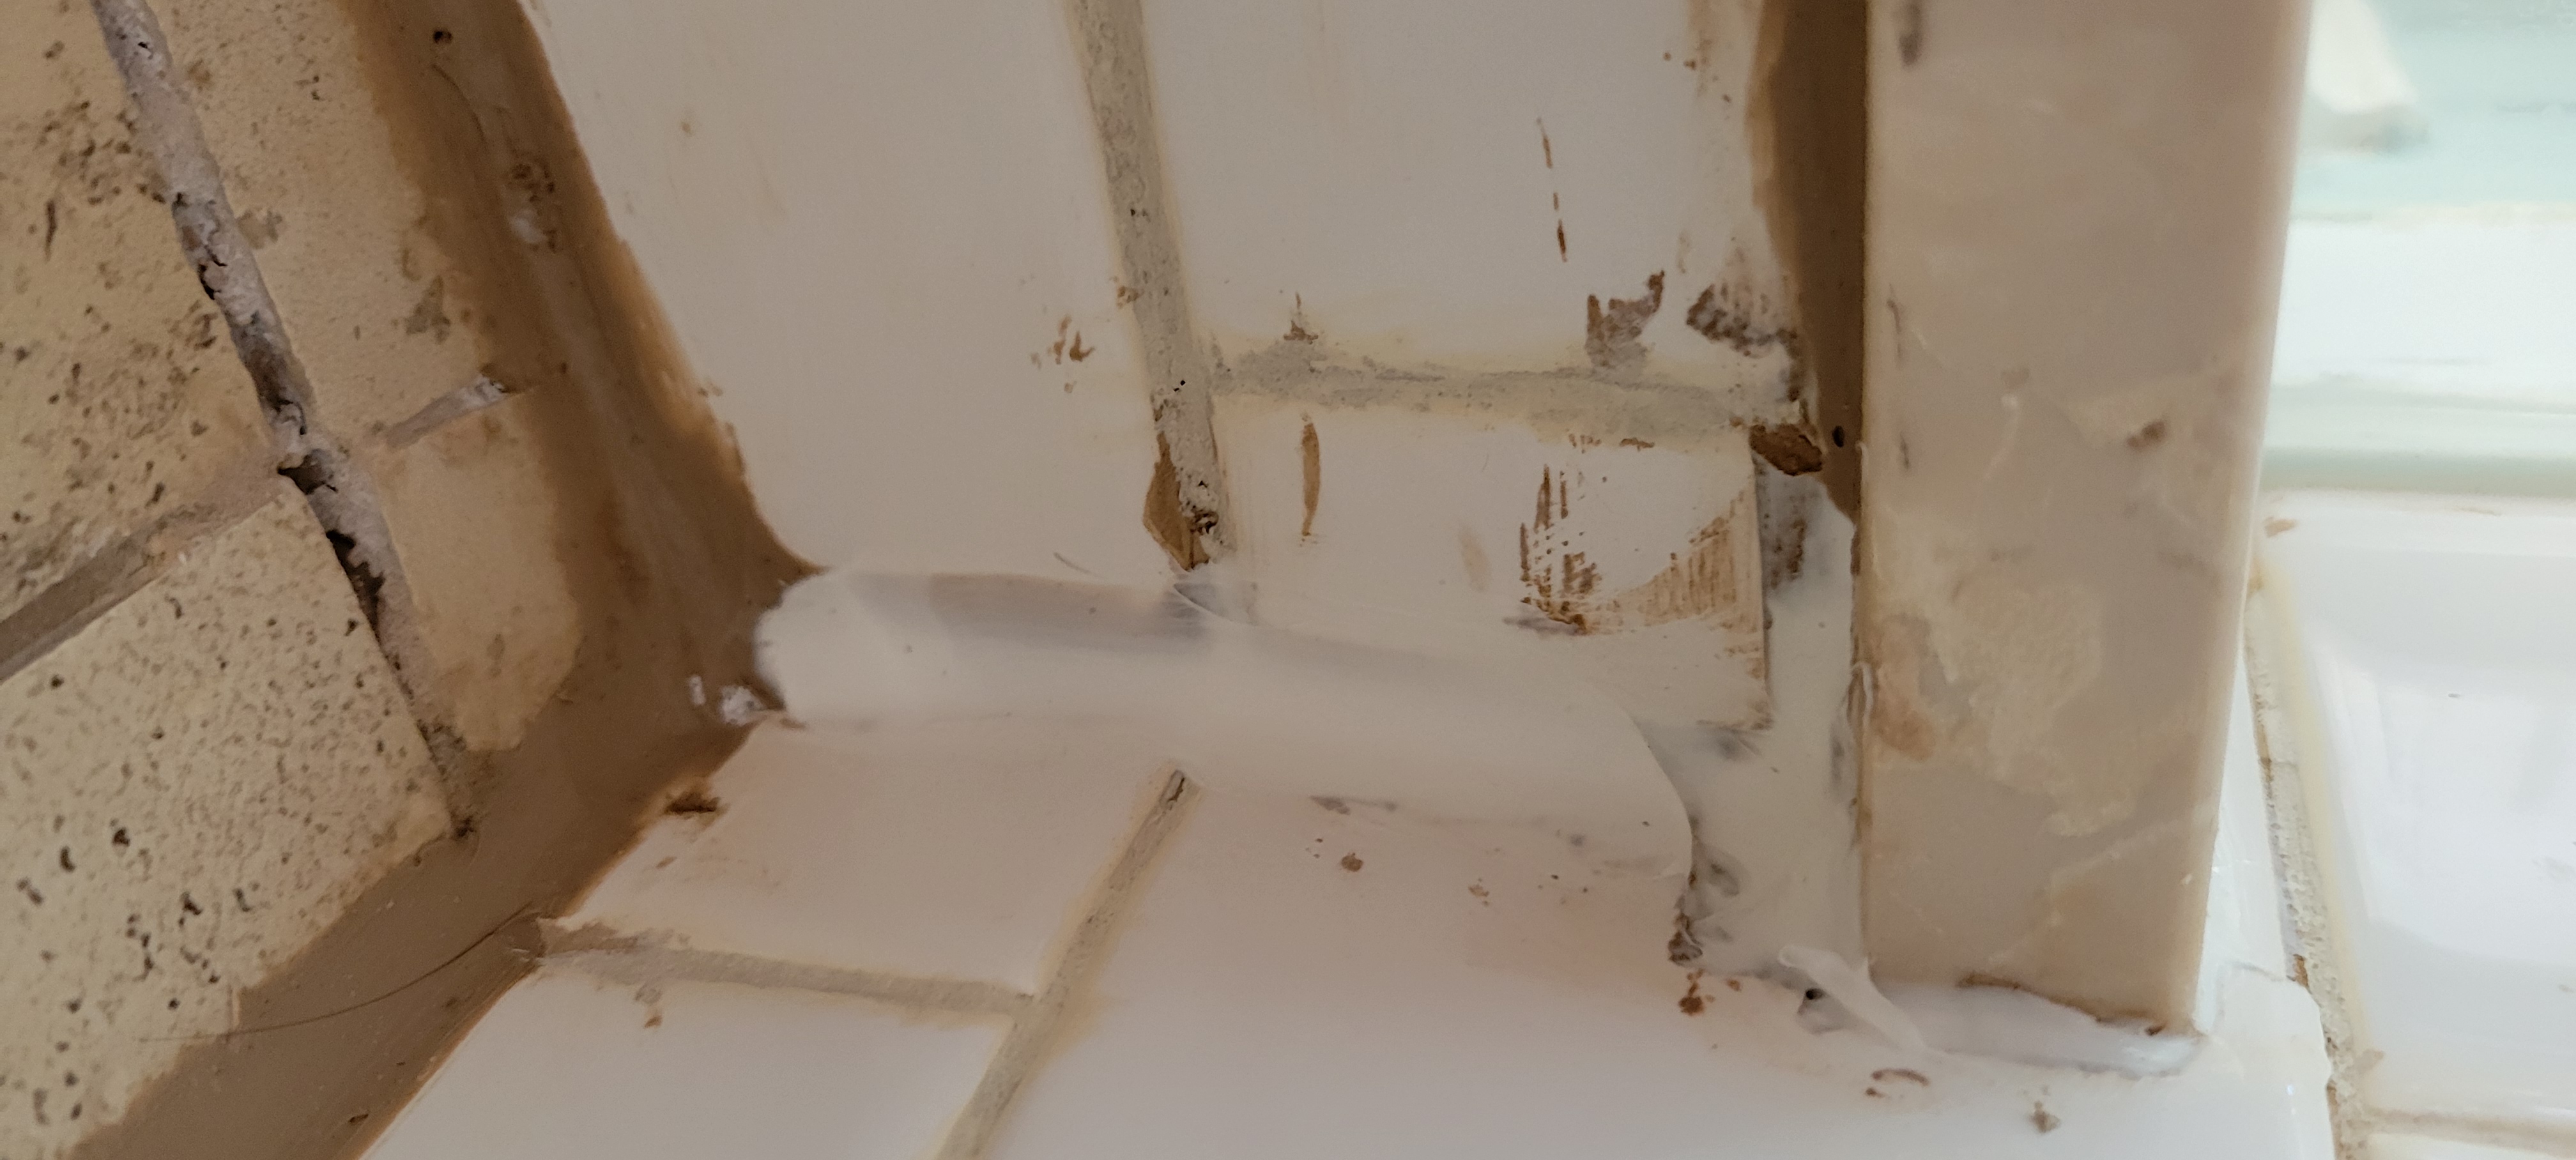 Caulk used to fill gaps from mis-cut tiles